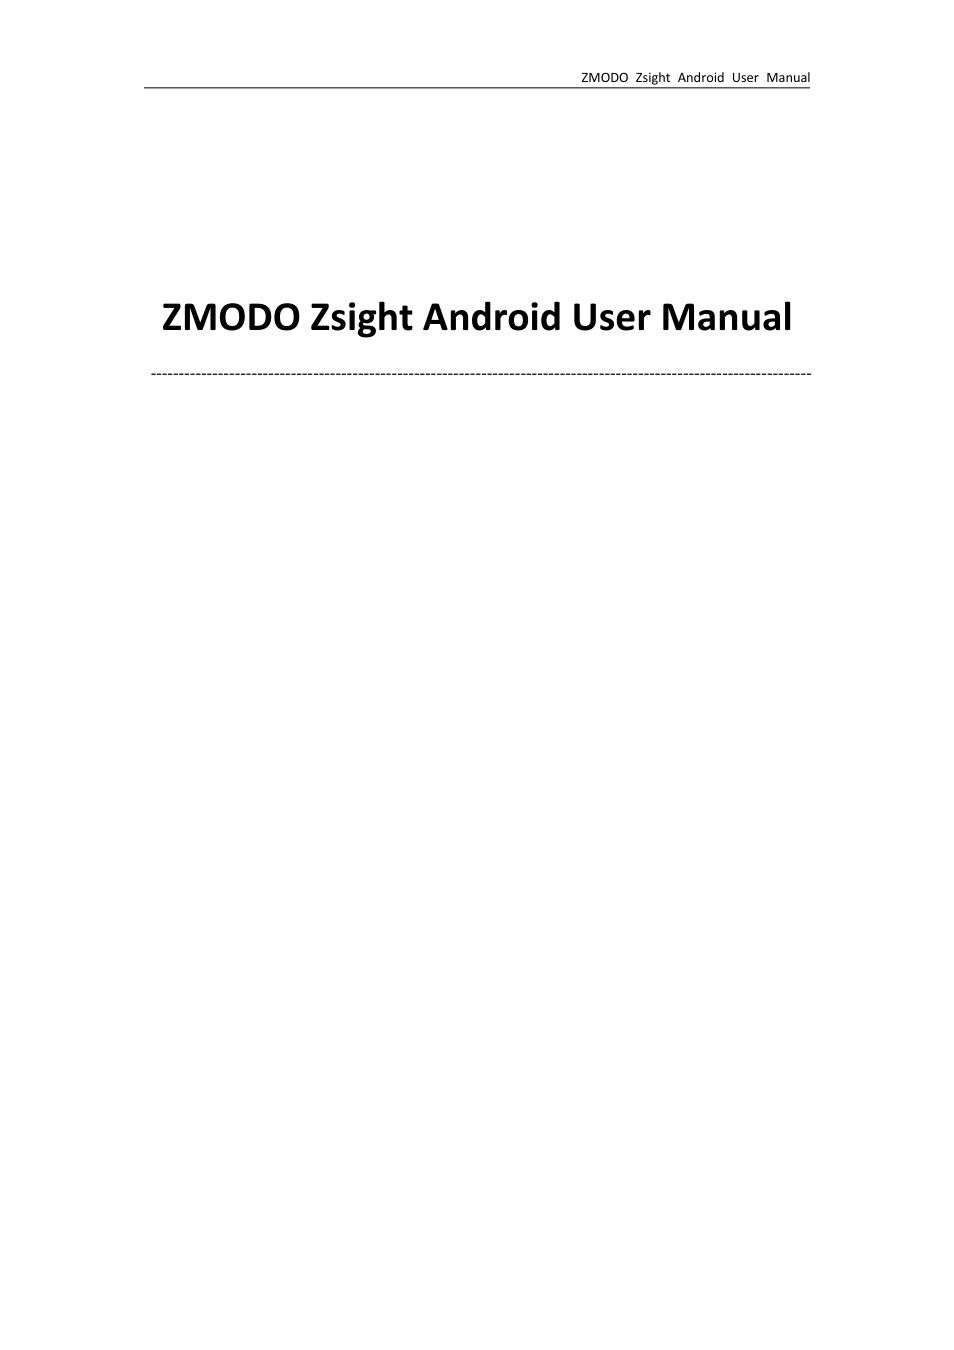 ZMODO ZP-IBH13-P 720P HD H.264 PoE IP Infrared Weatherproof Camera with QR Code Smartphone Setup - Zsight Android User Manual User Manual | 12 pages